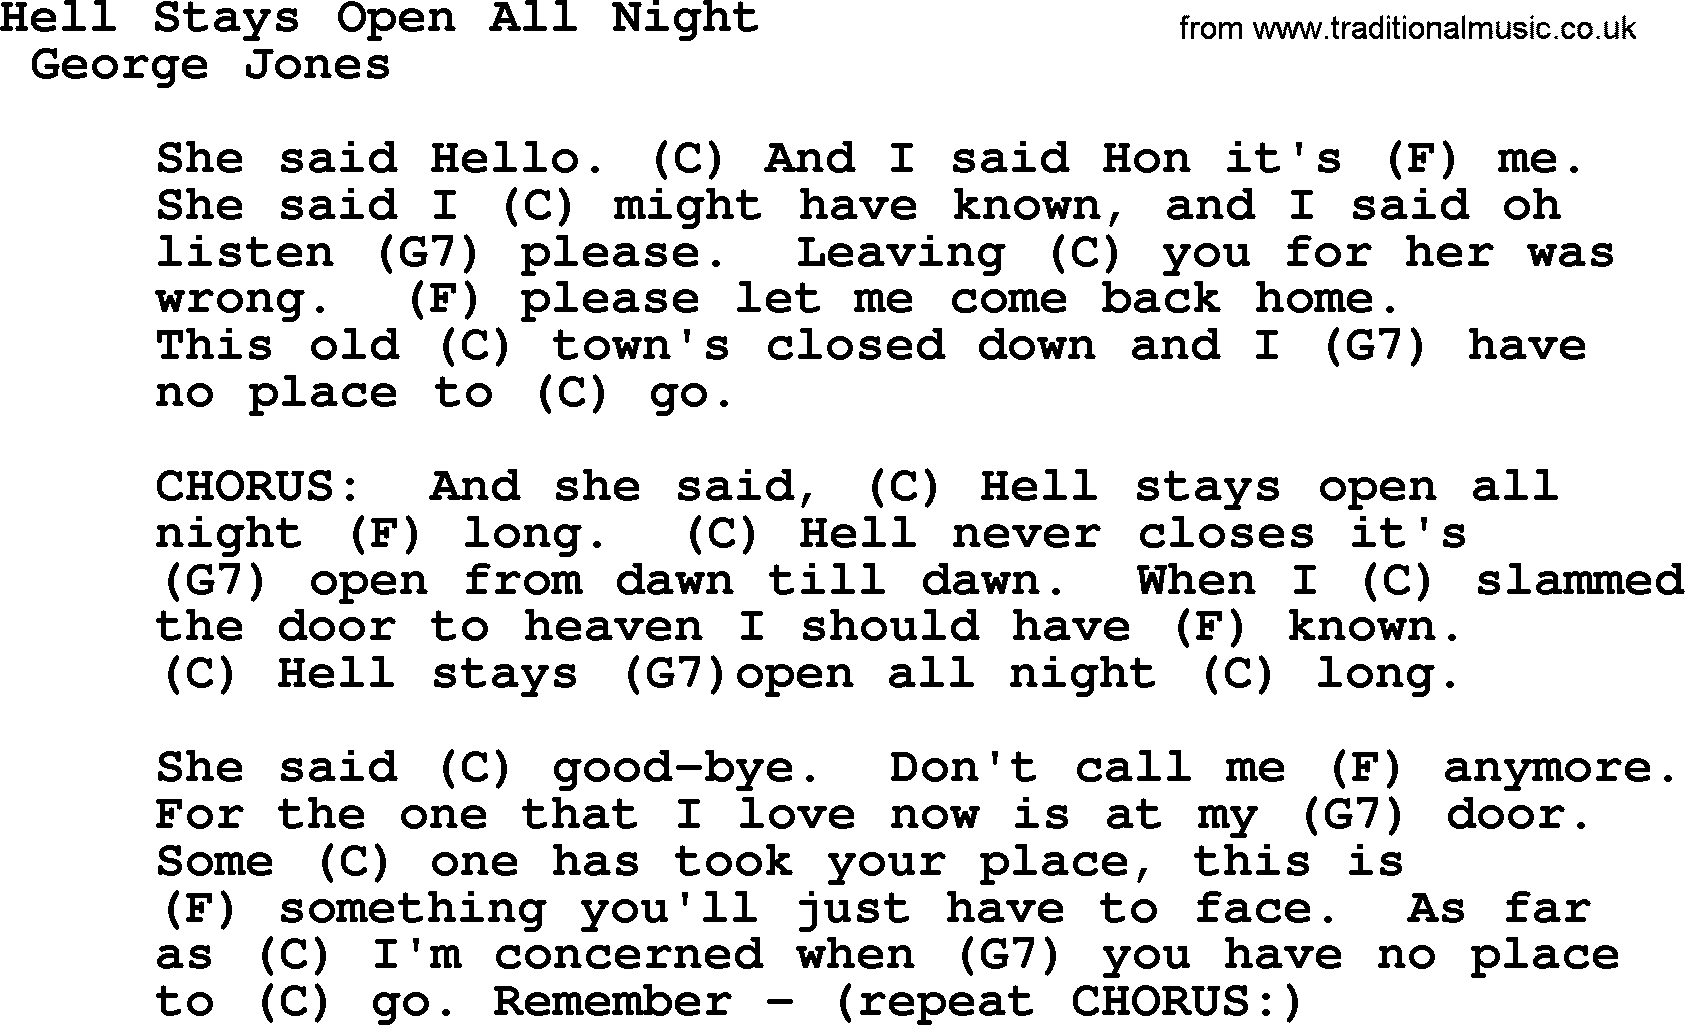 George Jones song: Hell Stays Open All Night, lyrics and chords